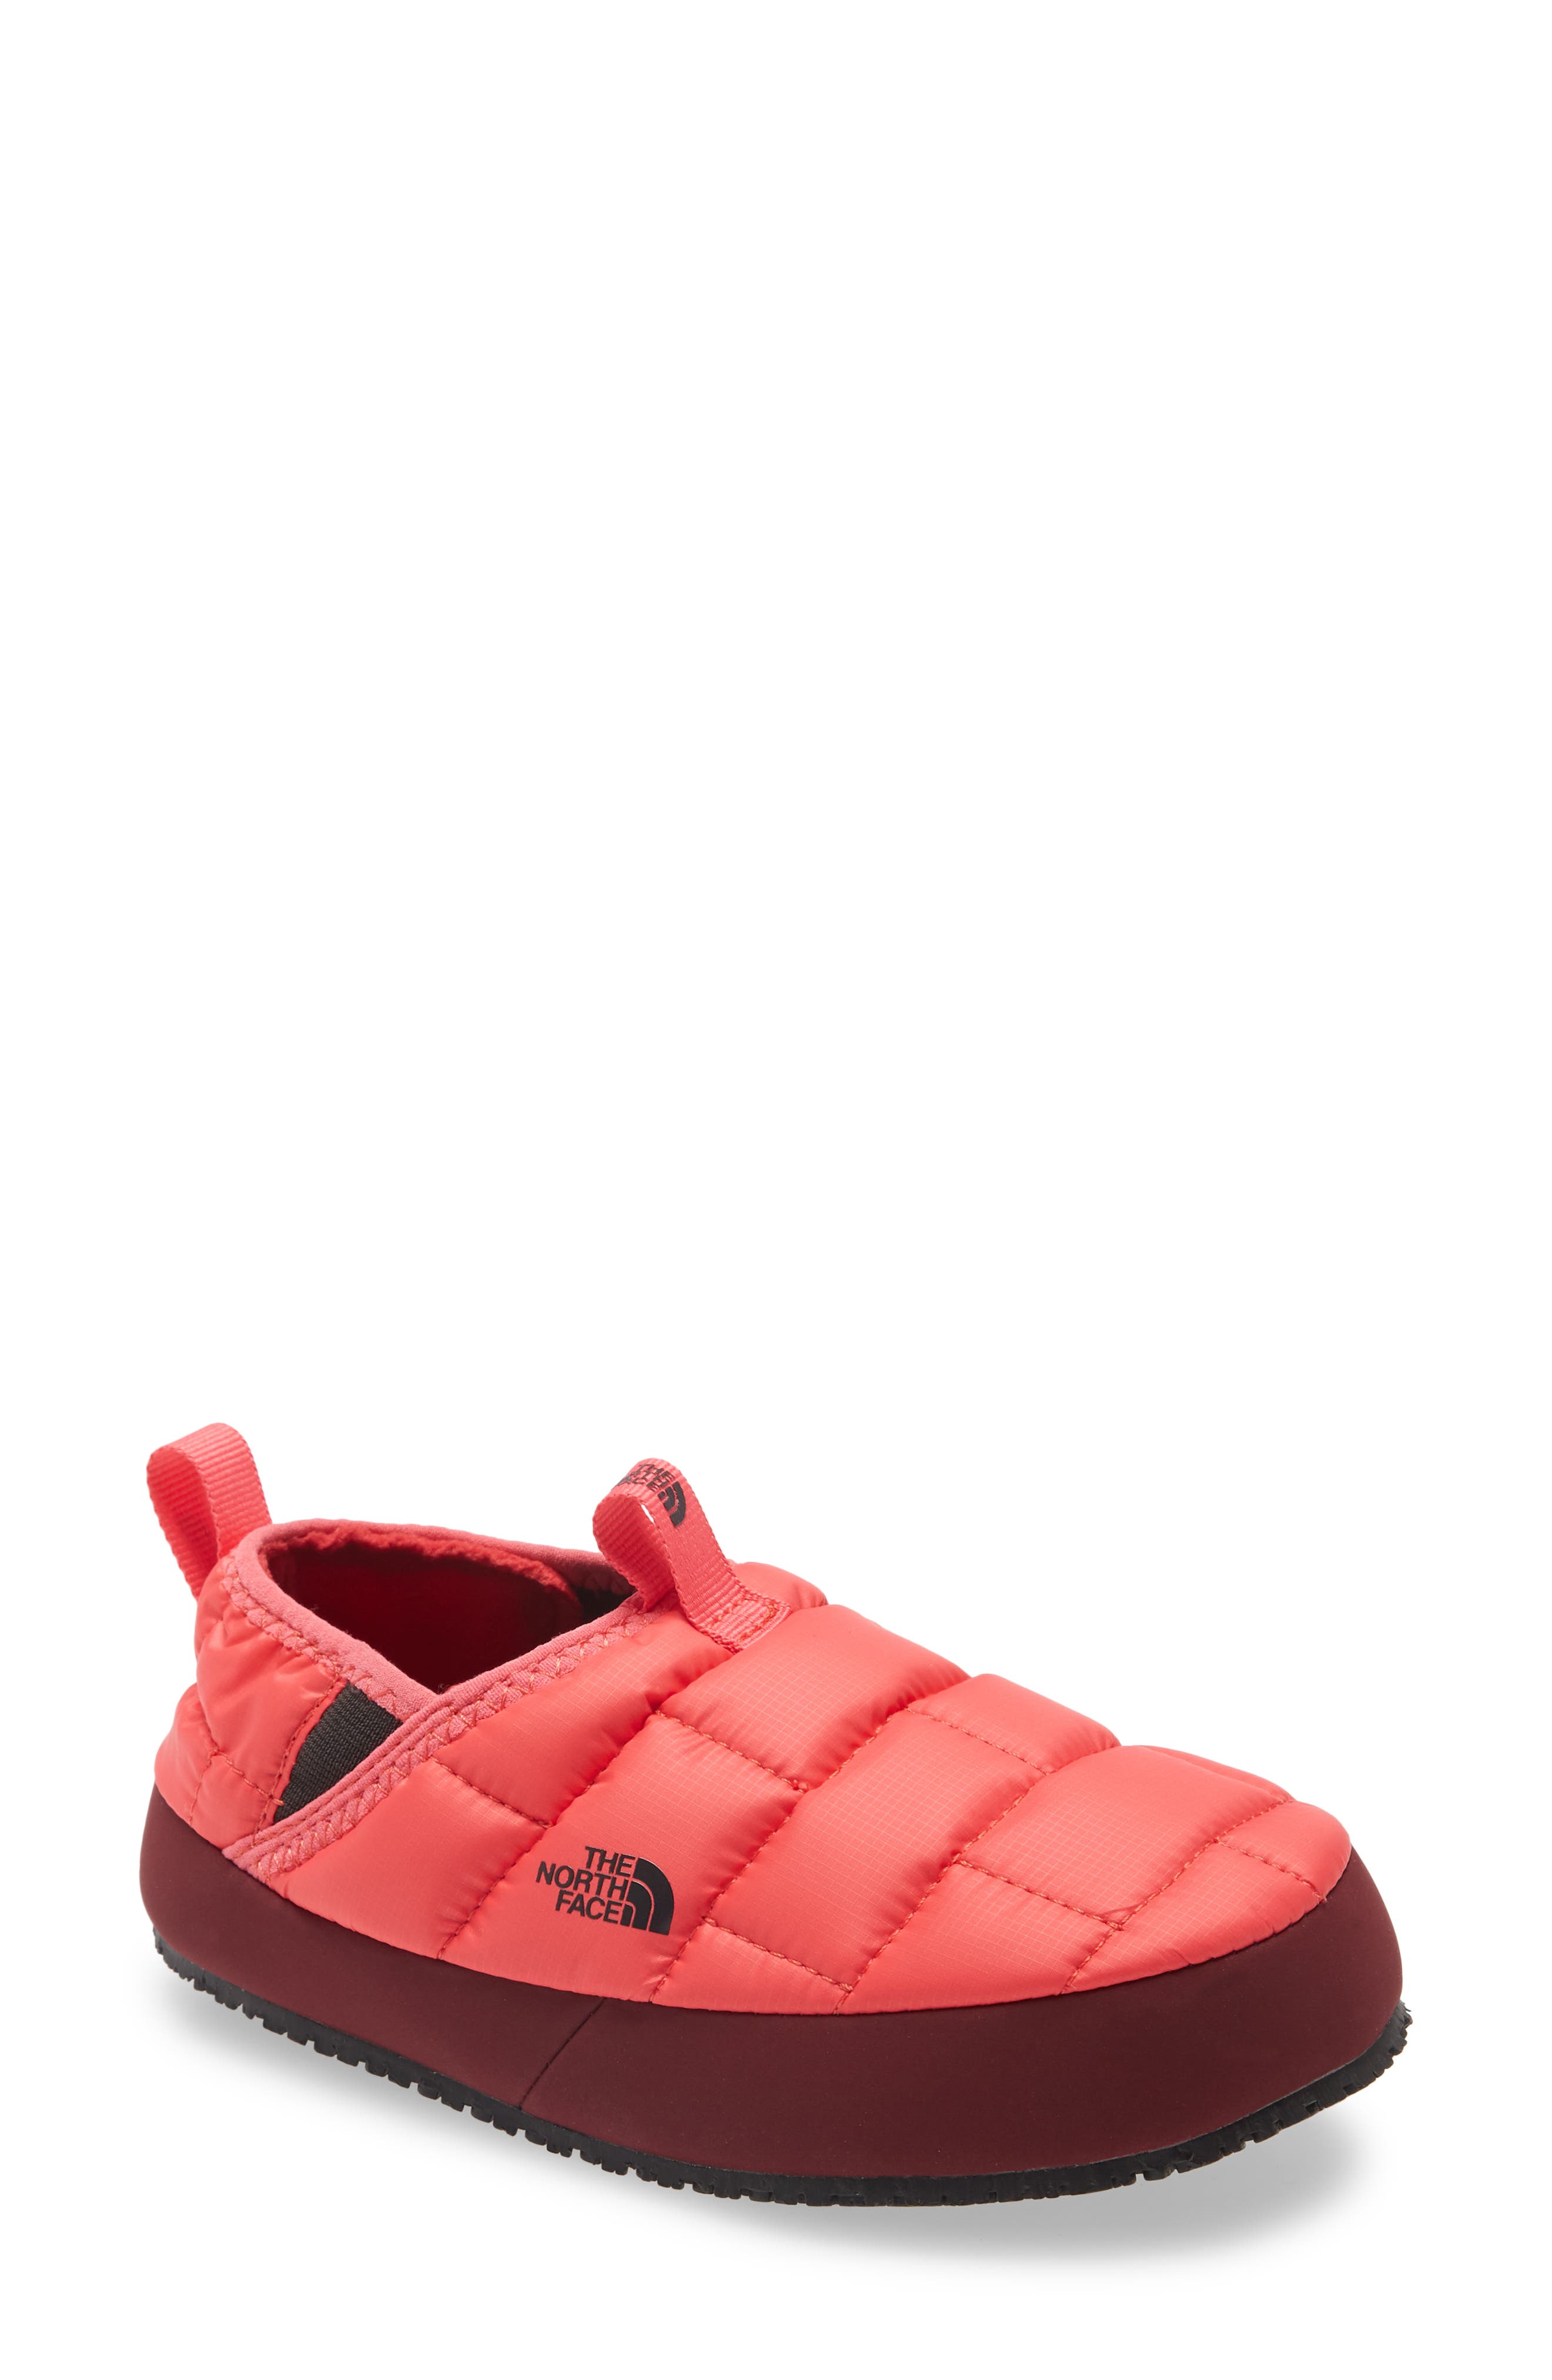 the north face baby shoes